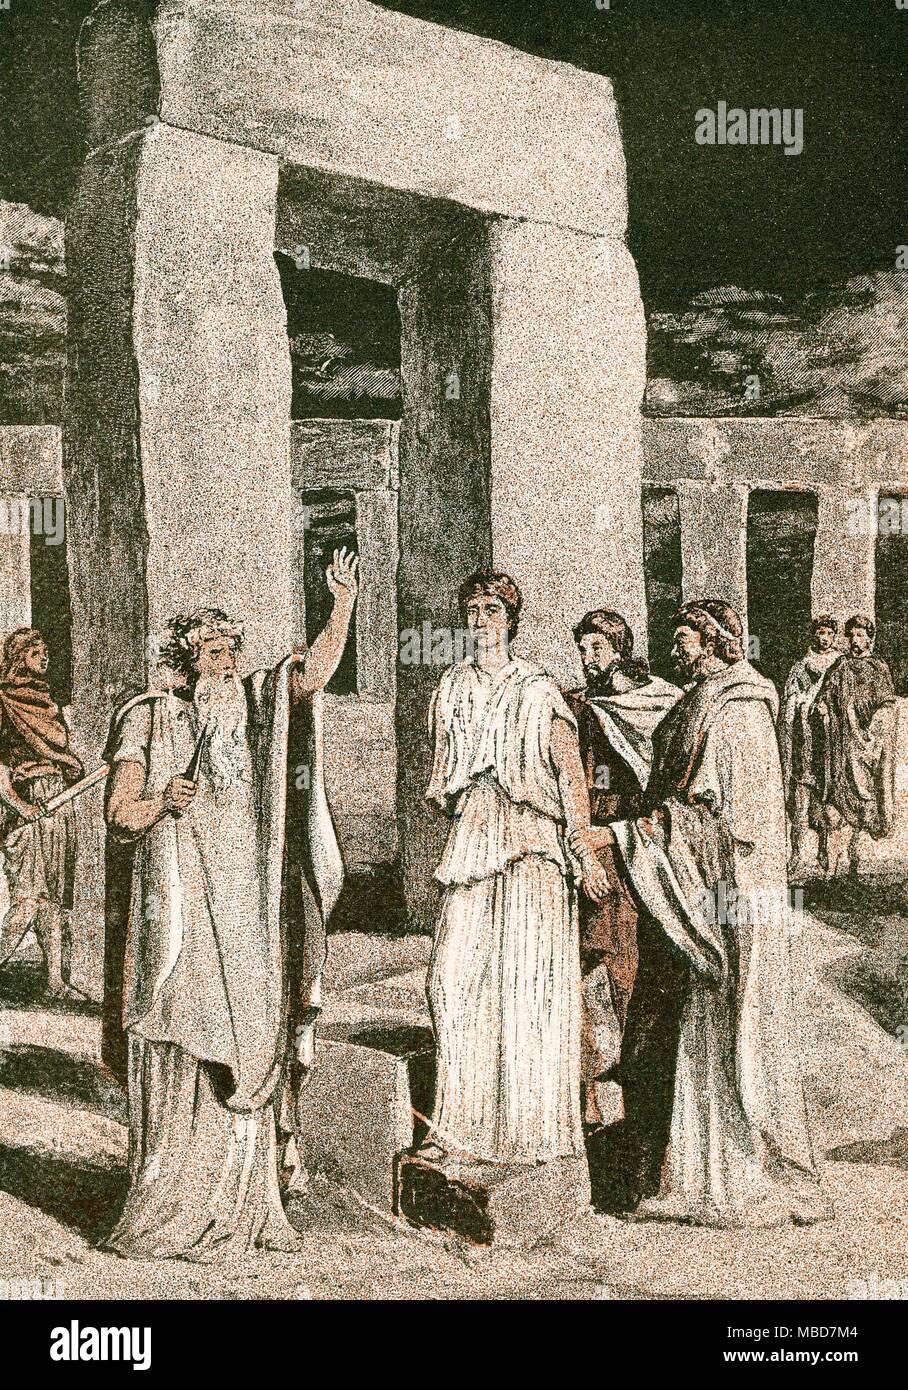 DRUIDS. 'The Sacrifice' - the human sacrifice, offered to the gods by the Druids, against the backdrop of the Stonehenge circle. Lithograph from Alfred J. Church, The Count of the Saxon Shore, or The Villa in Vectis, 1887. Stock Photo